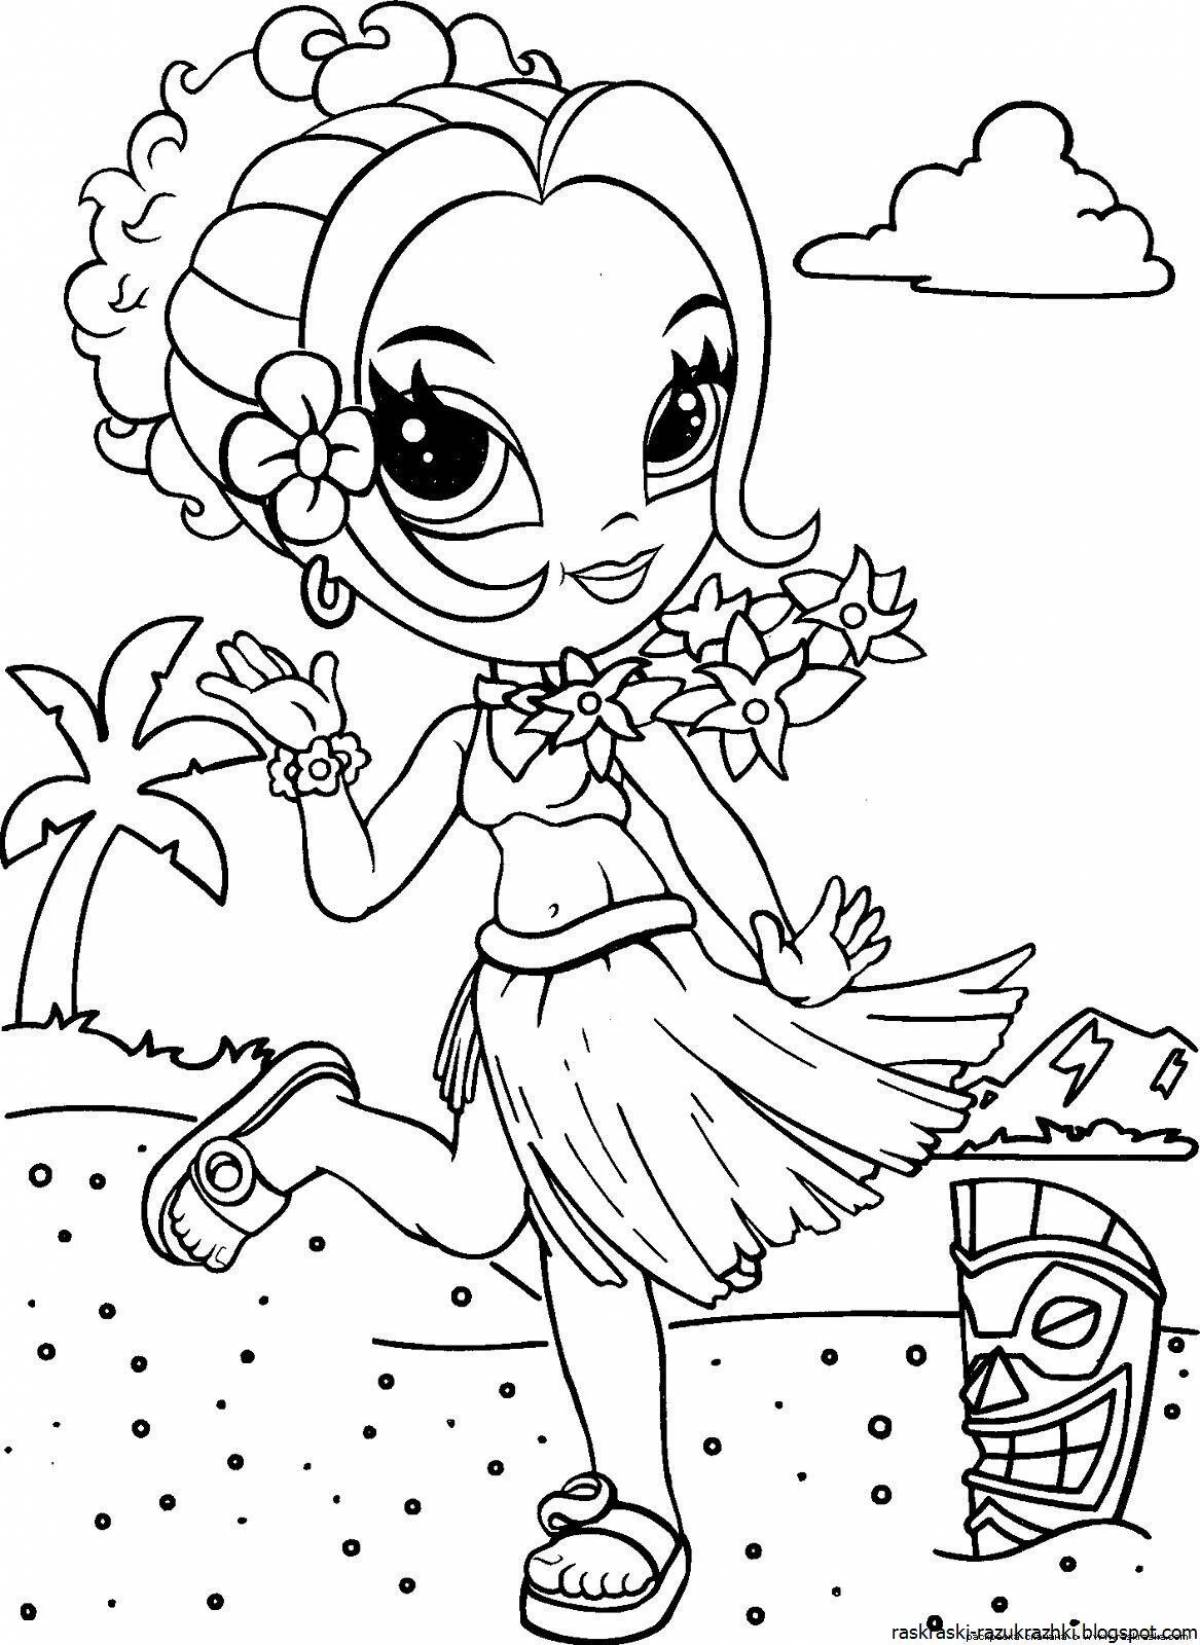 Majestic coloring page 6 for girls